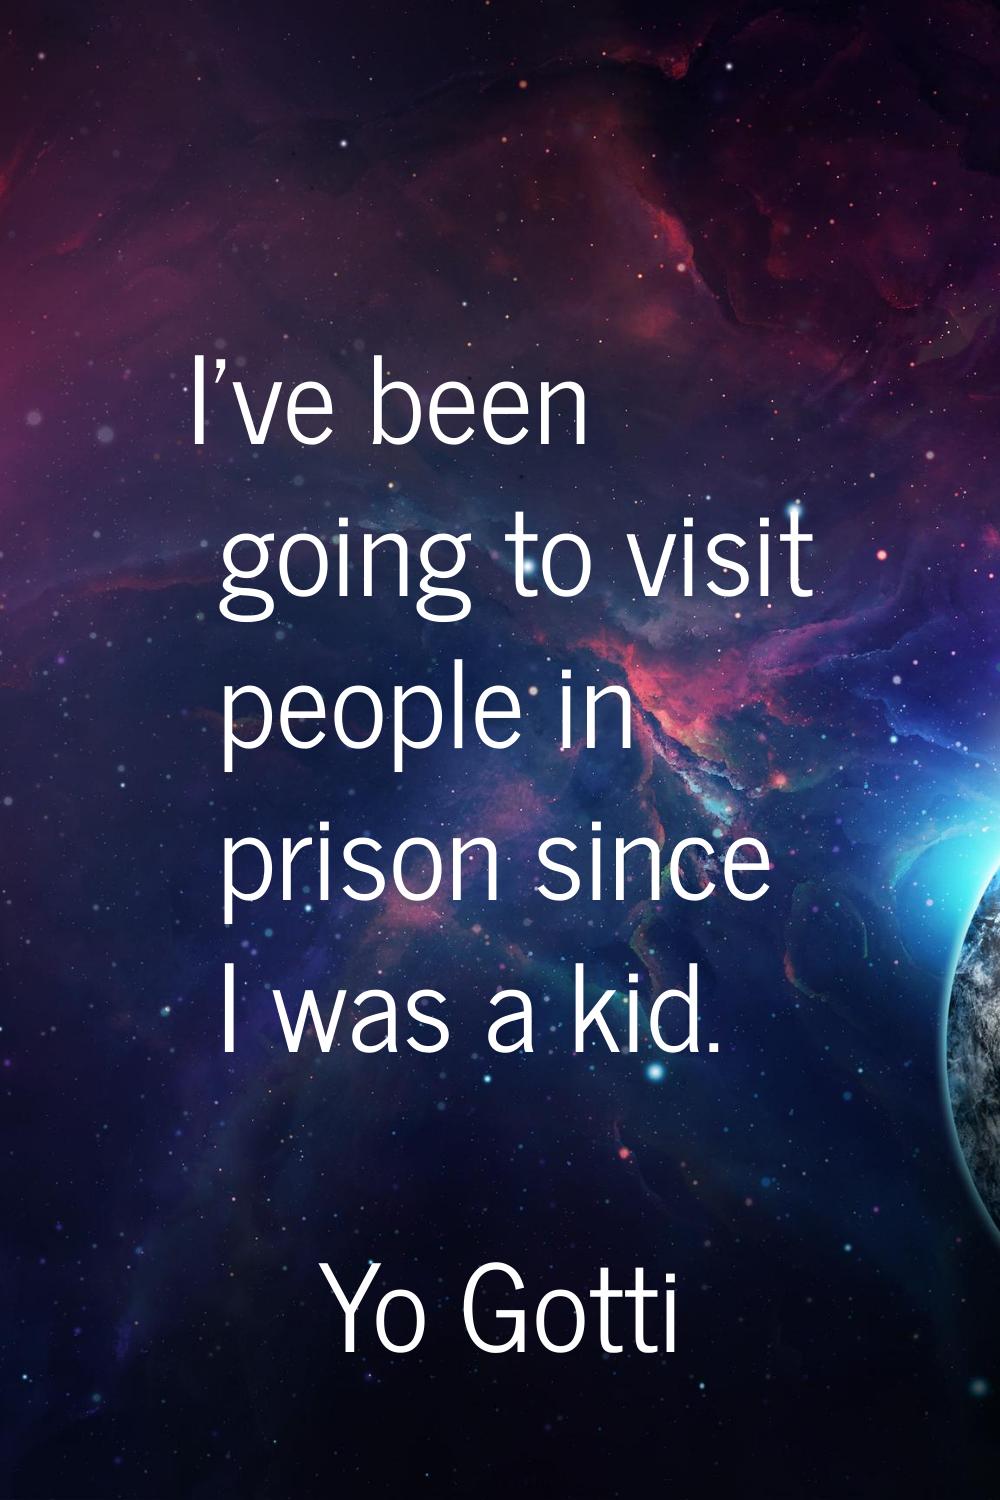 I've been going to visit people in prison since I was a kid.